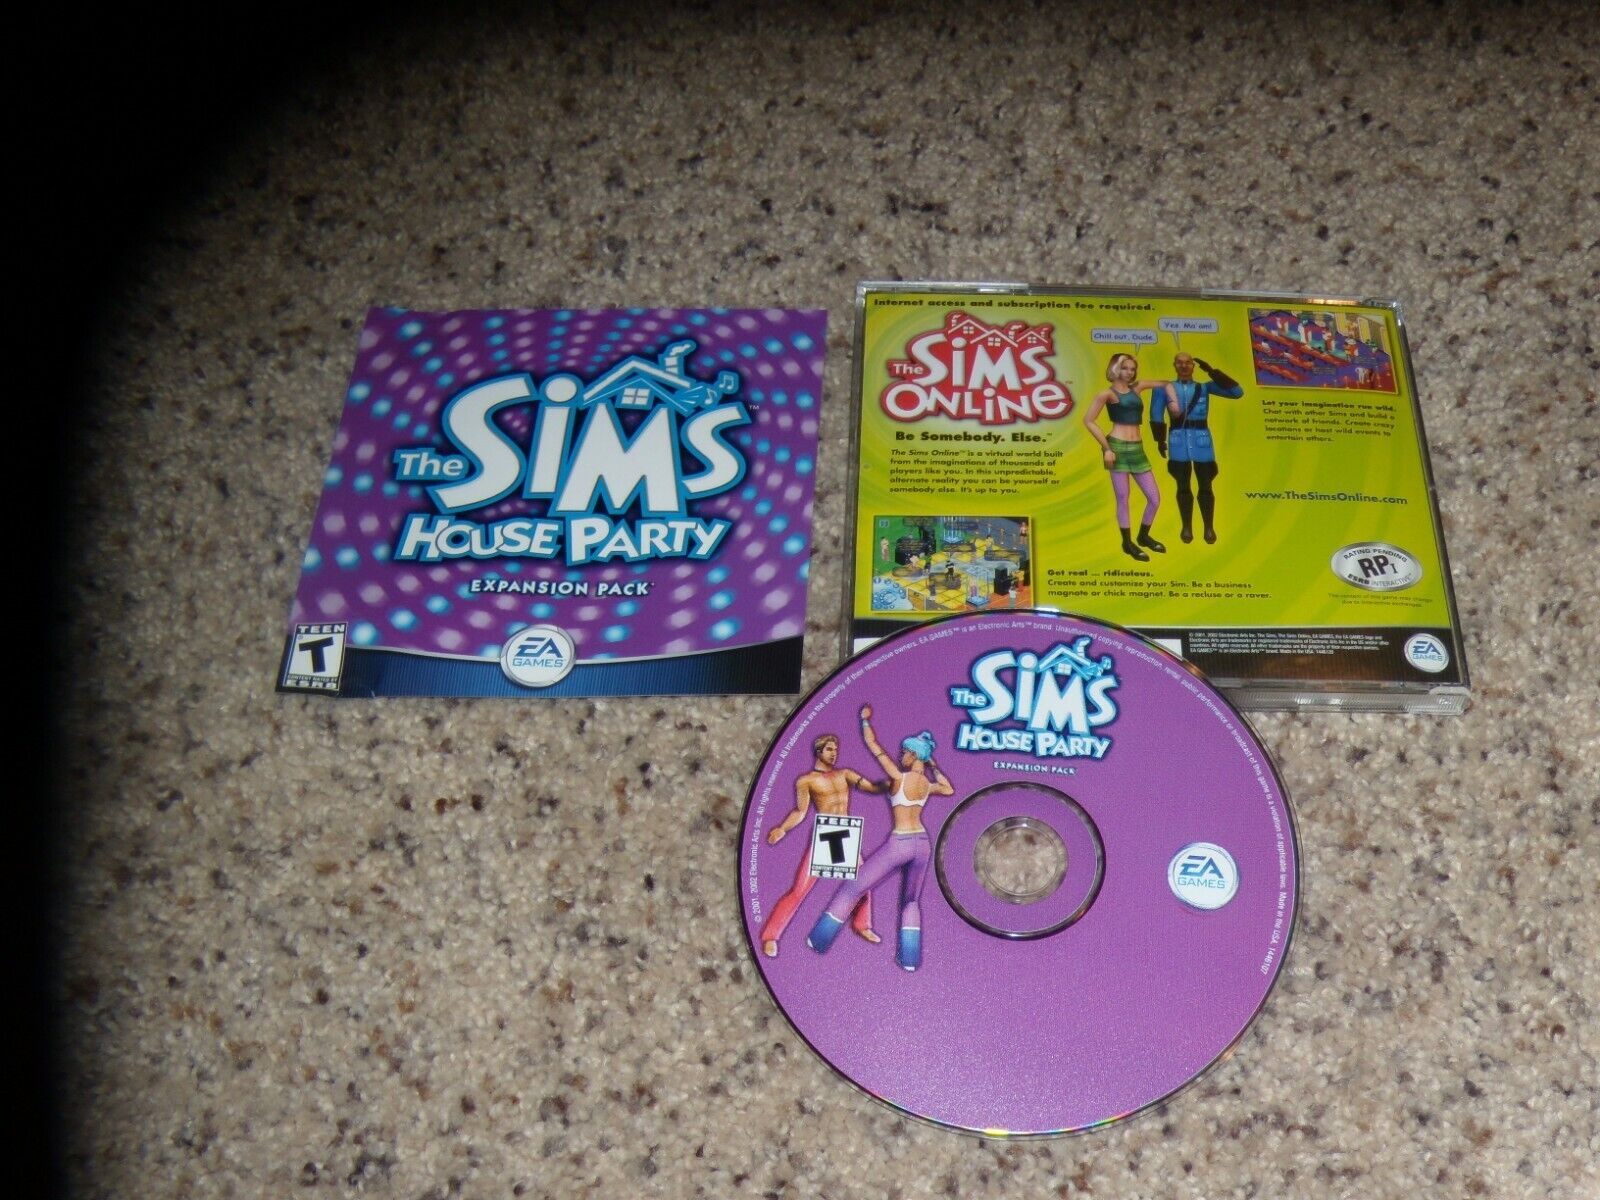 the Sims House Party Expansion Pack (PC, 2002) Game with key